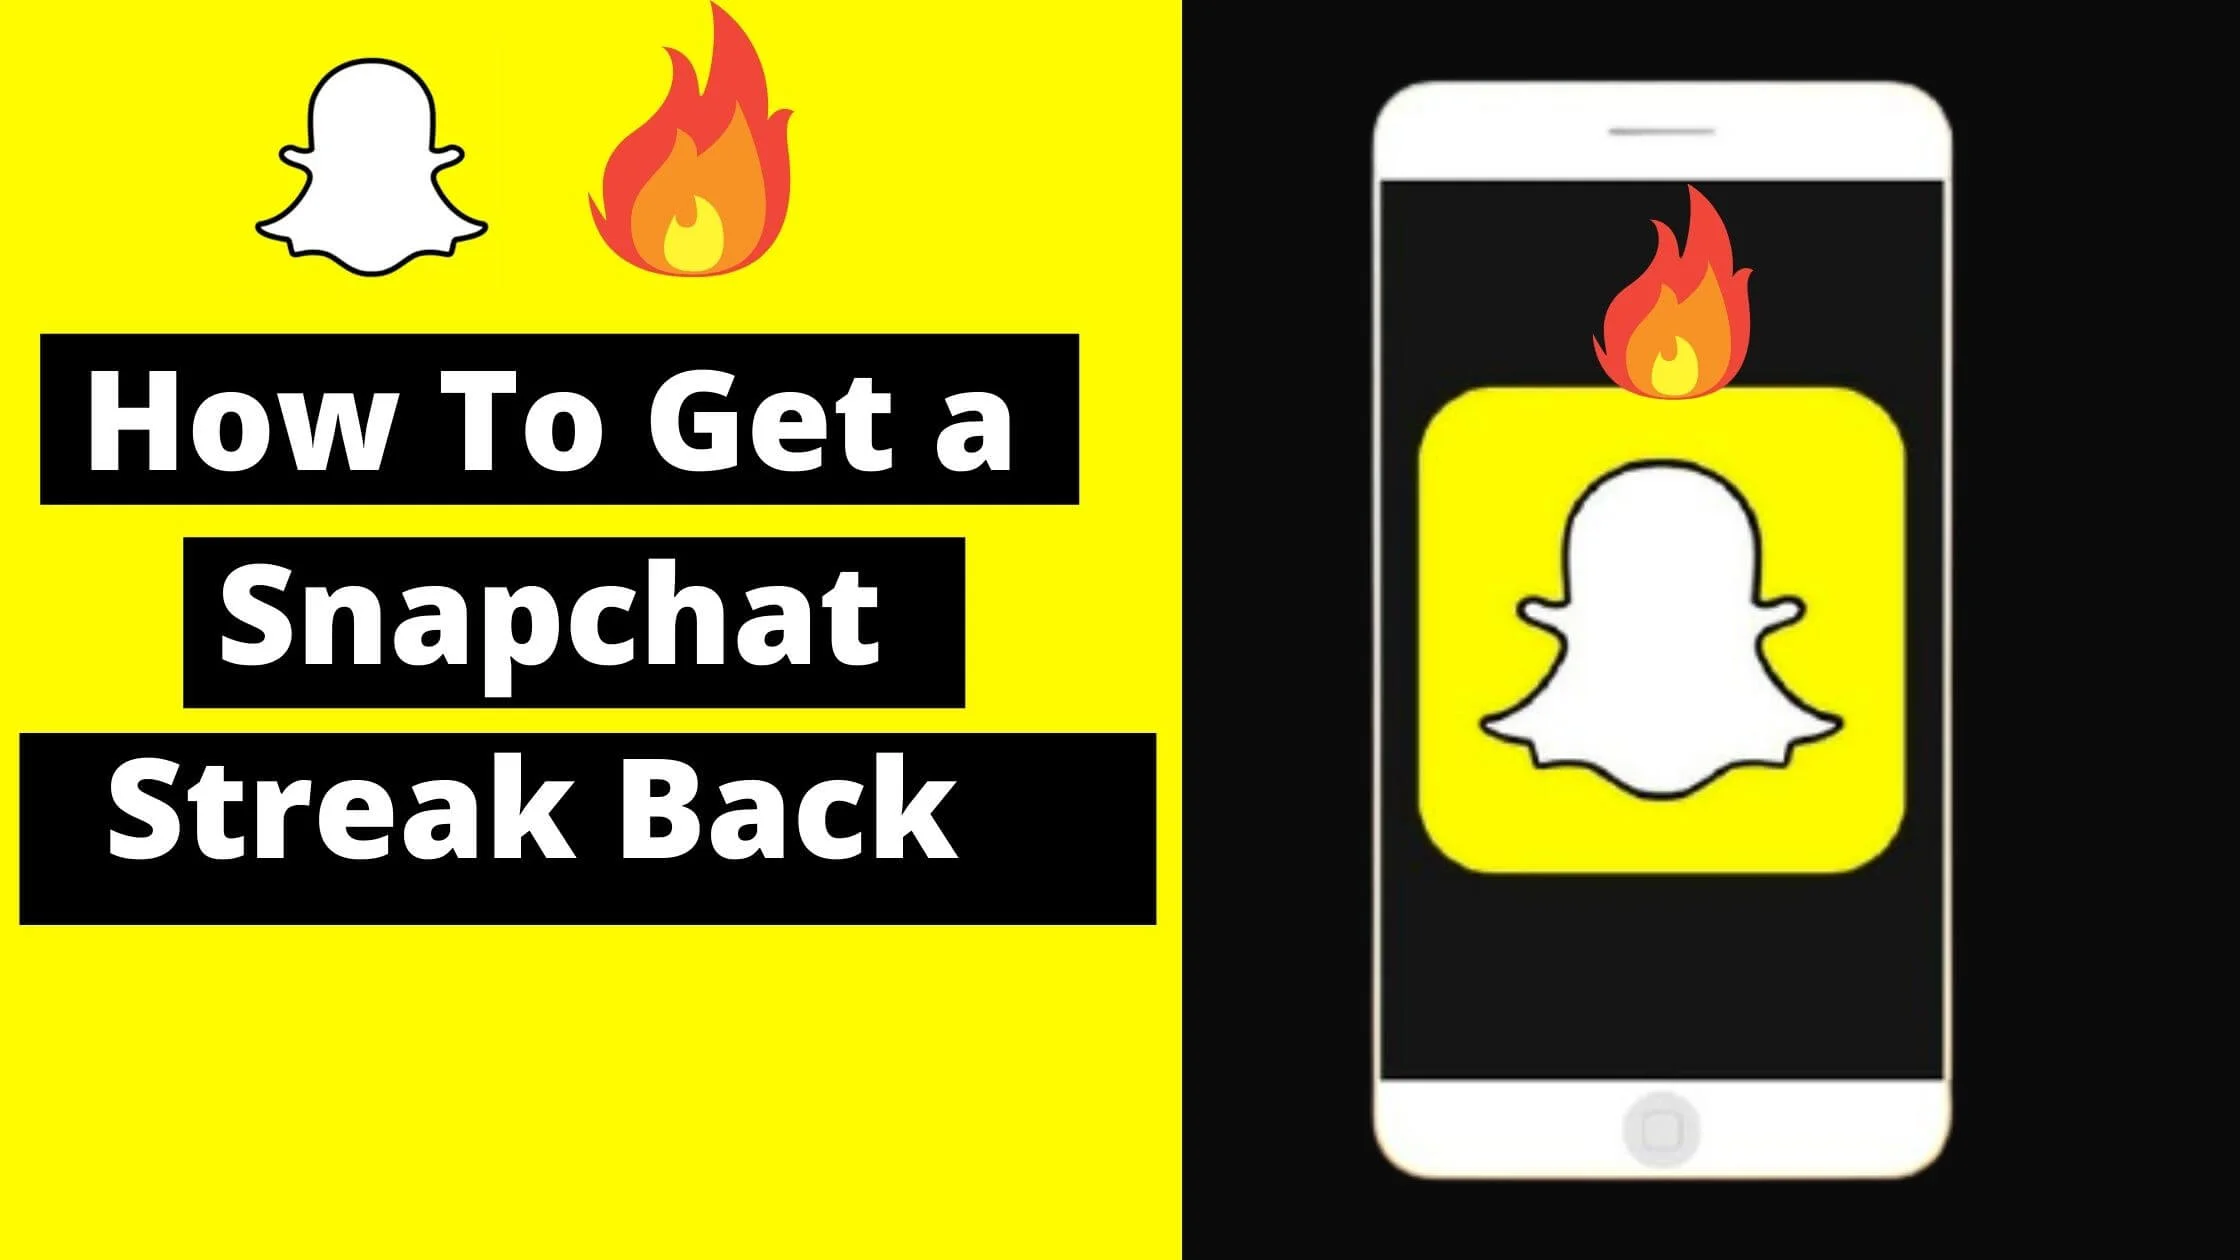 How To Get a Snapchat Streak Back